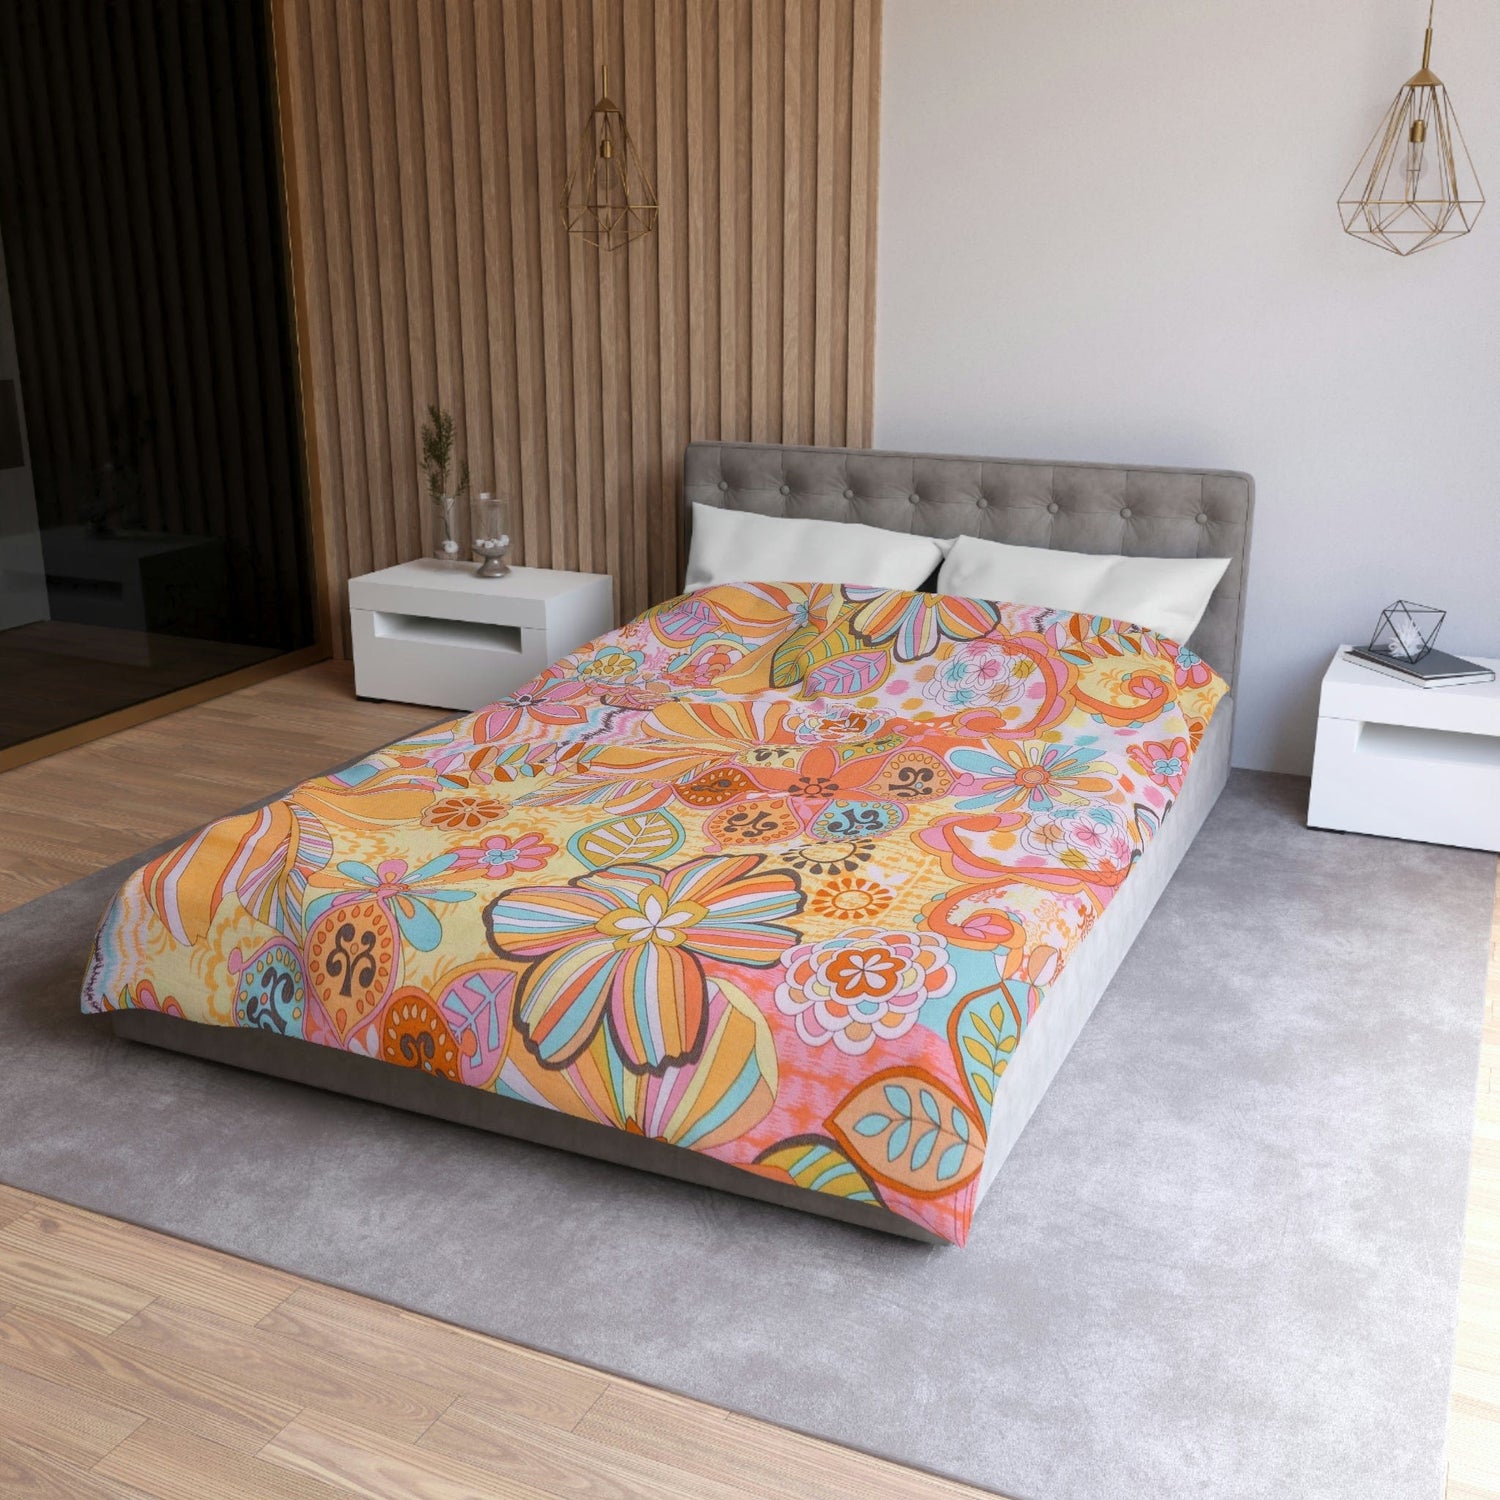 Kate McEnroe New York Retro Trippy Flower Power Duvet Cover, 70s Mid Mod Hippie Chic Floral Bedroom Decor with Groovy Orange, Yellow, and Blue PaletteDuvet Covers26323424880278798214